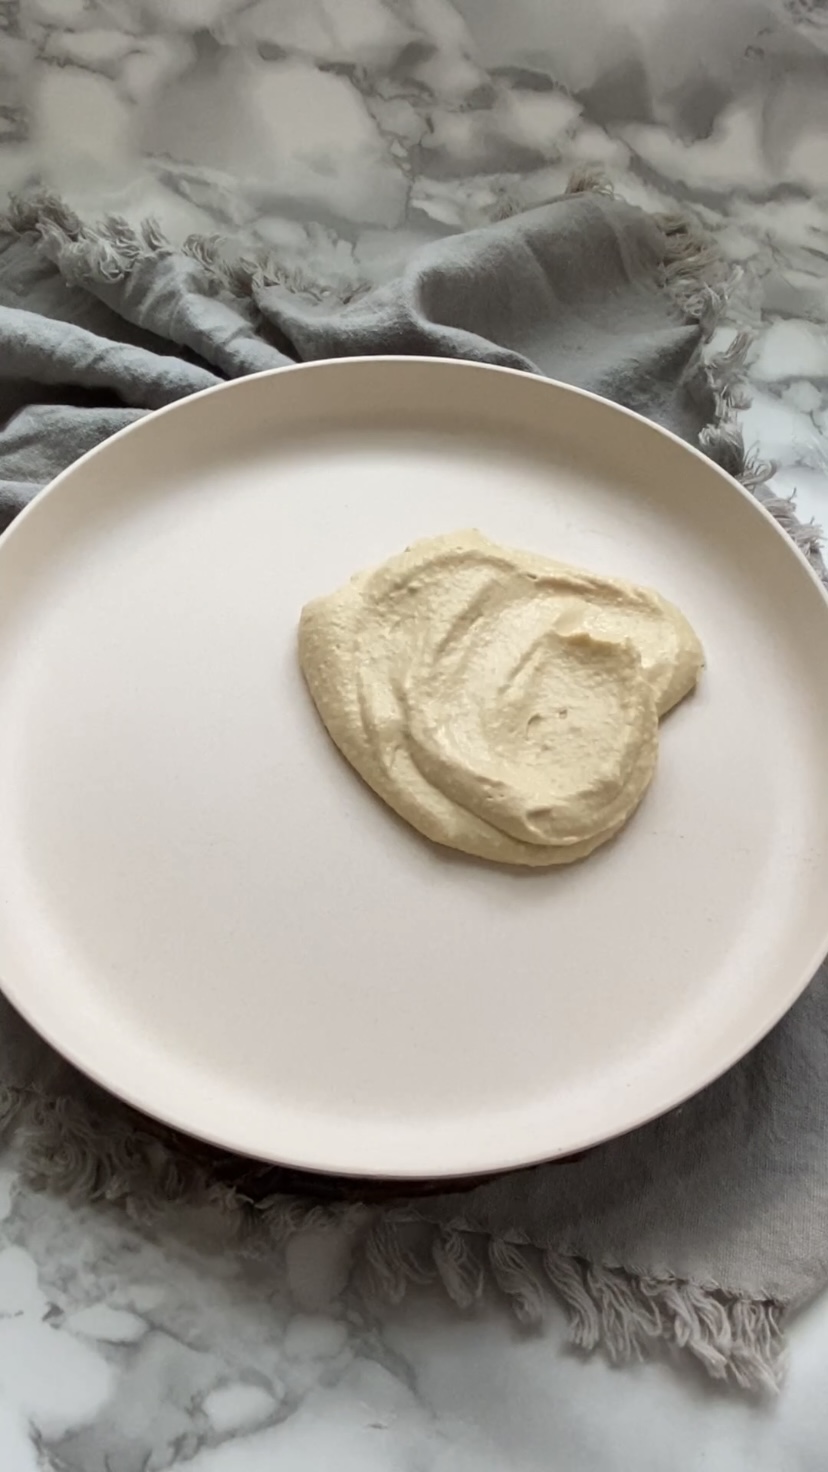 A plate with hummus spread out on it.